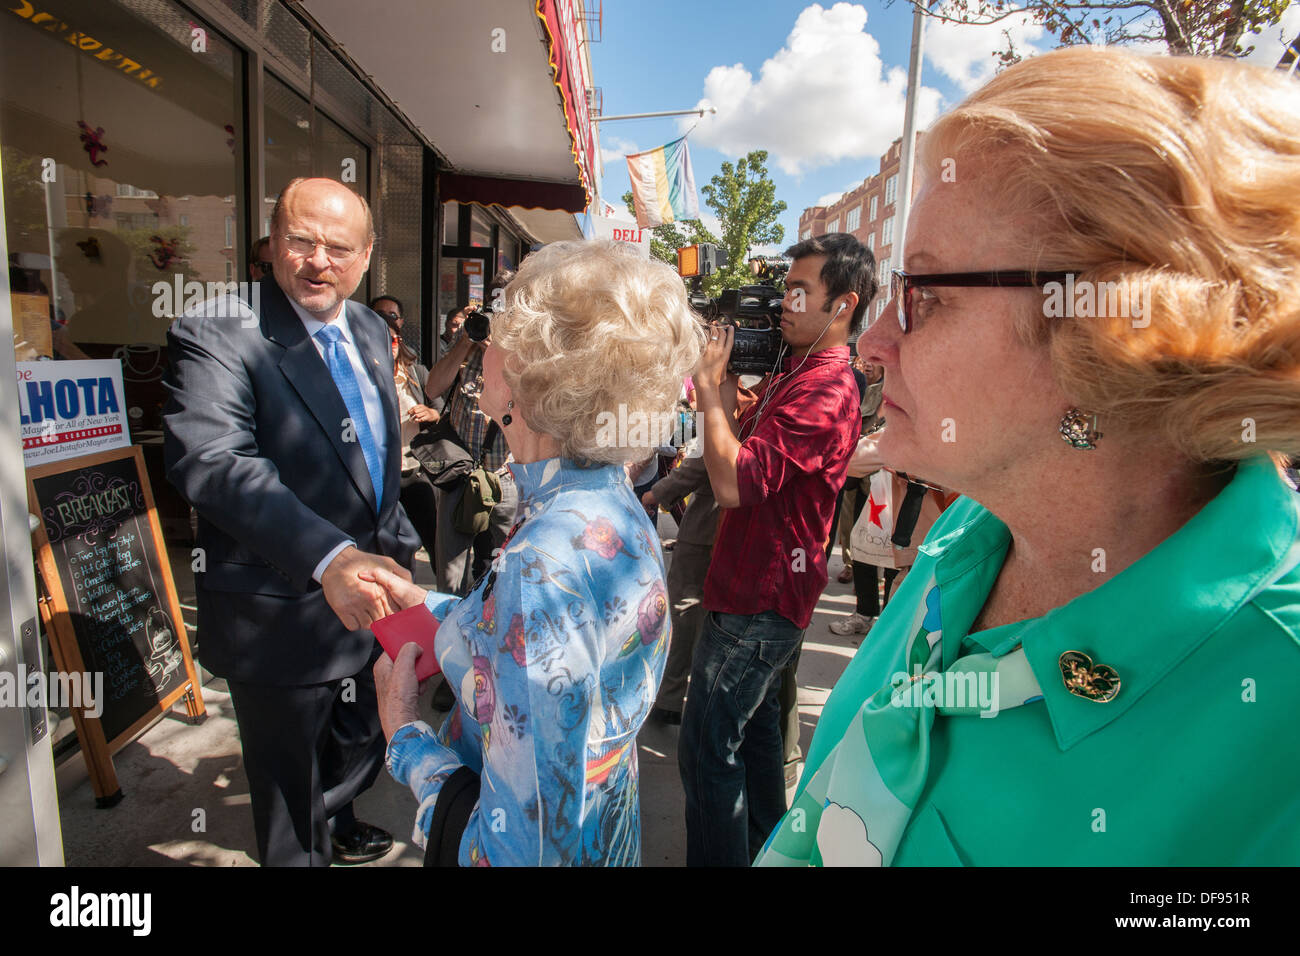 Republican Mayoral candidate Joe Lhota visiting small businesses and campaigning in Jackson Heights in Queens in New York Stock Photo